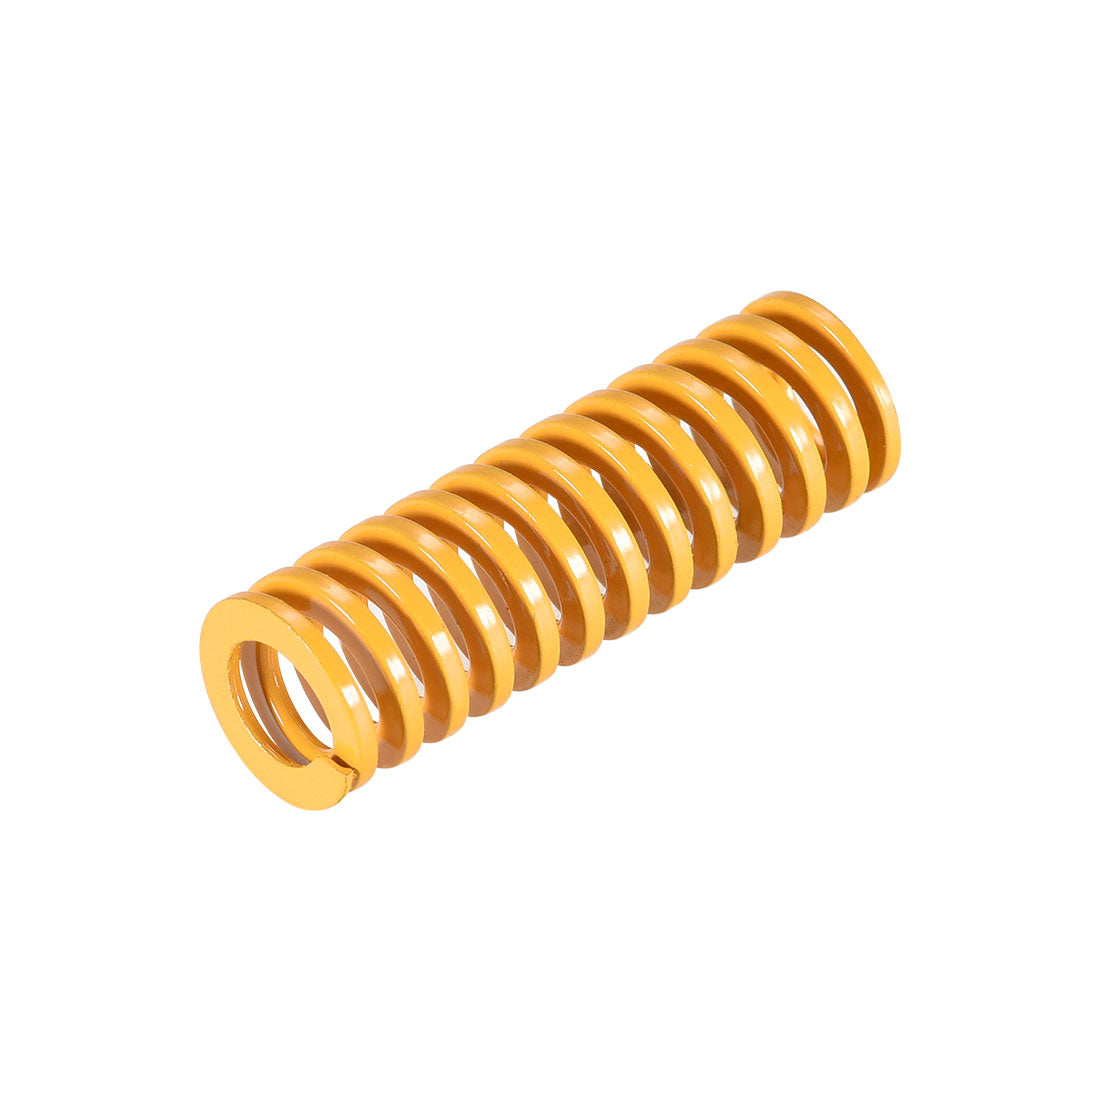 uxcell Uxcell Heated Bed Springs for 3D Printer Light Load Compression Spring, 8 x 25 mm 16pcs